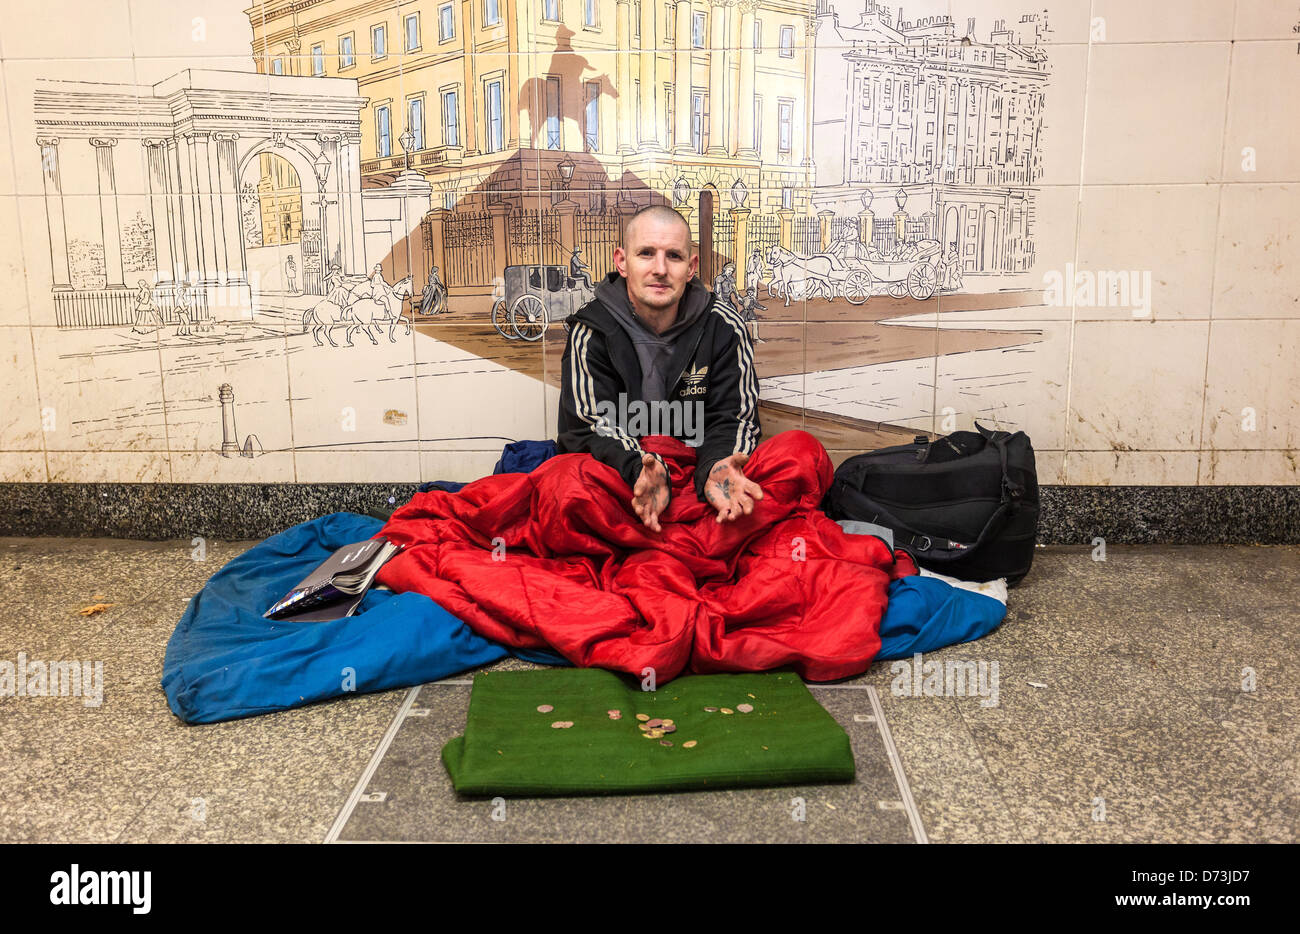 Homeless man begging for money in a dirty underpass, London, England, UK. Stock Photo